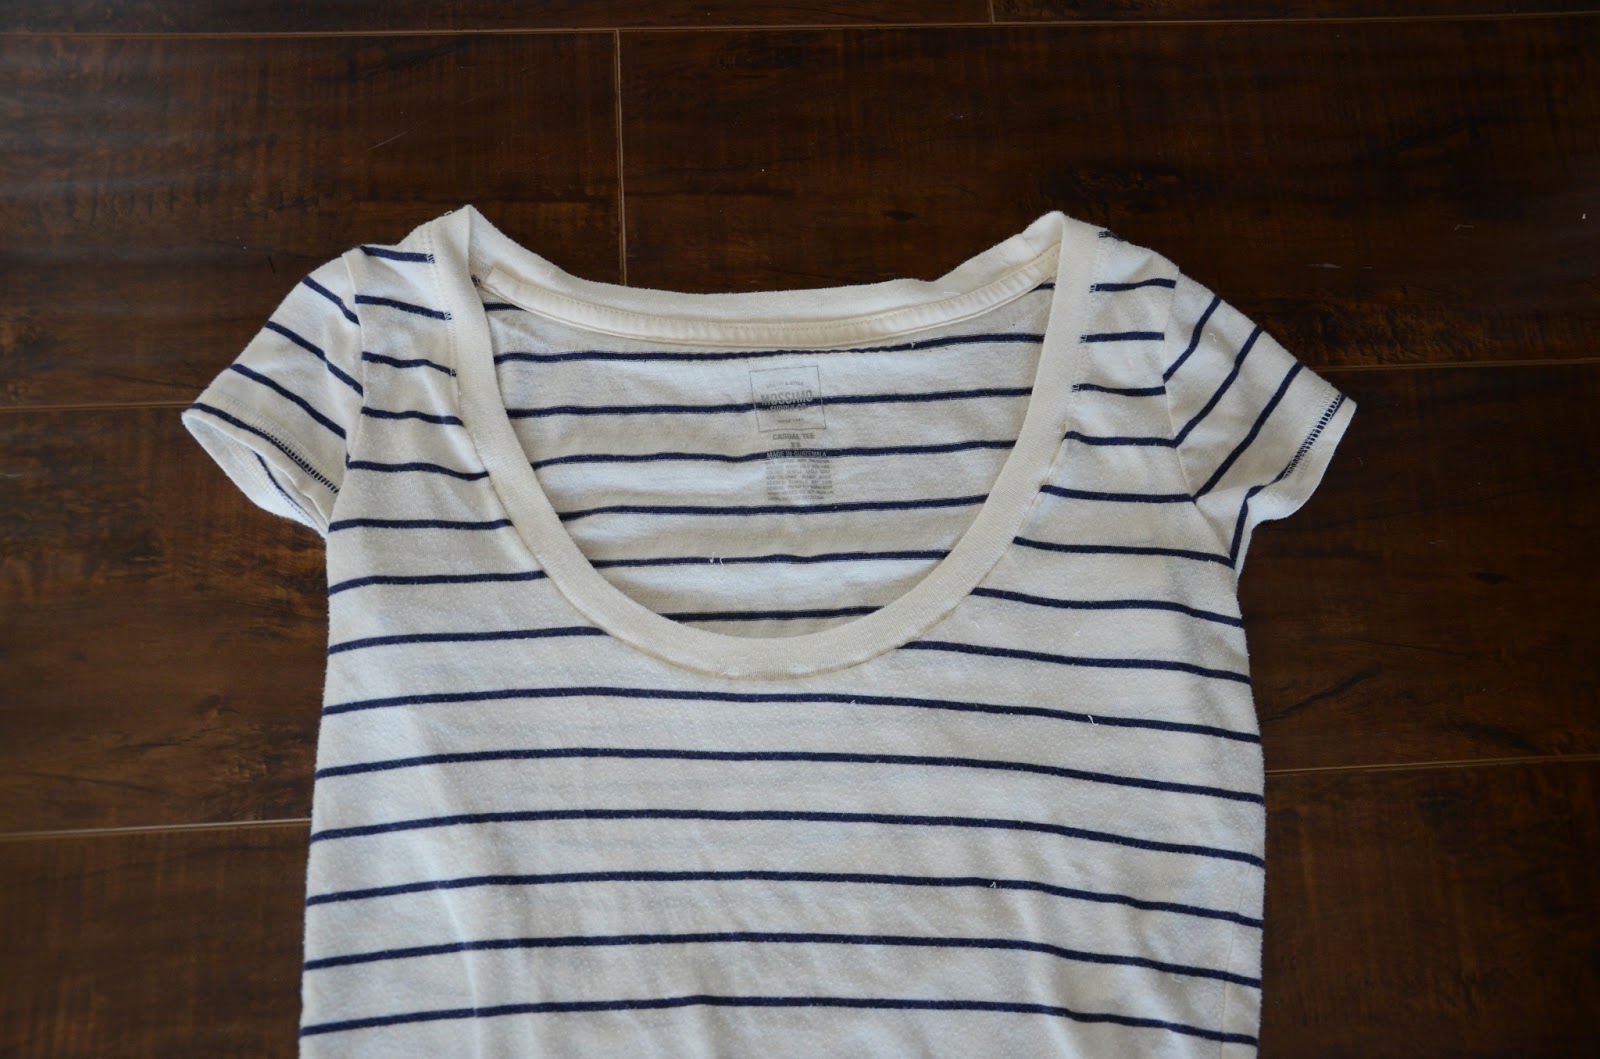 Changing a Neckline, Adding Width to a T-shirt, or Making a Crop-Top ...